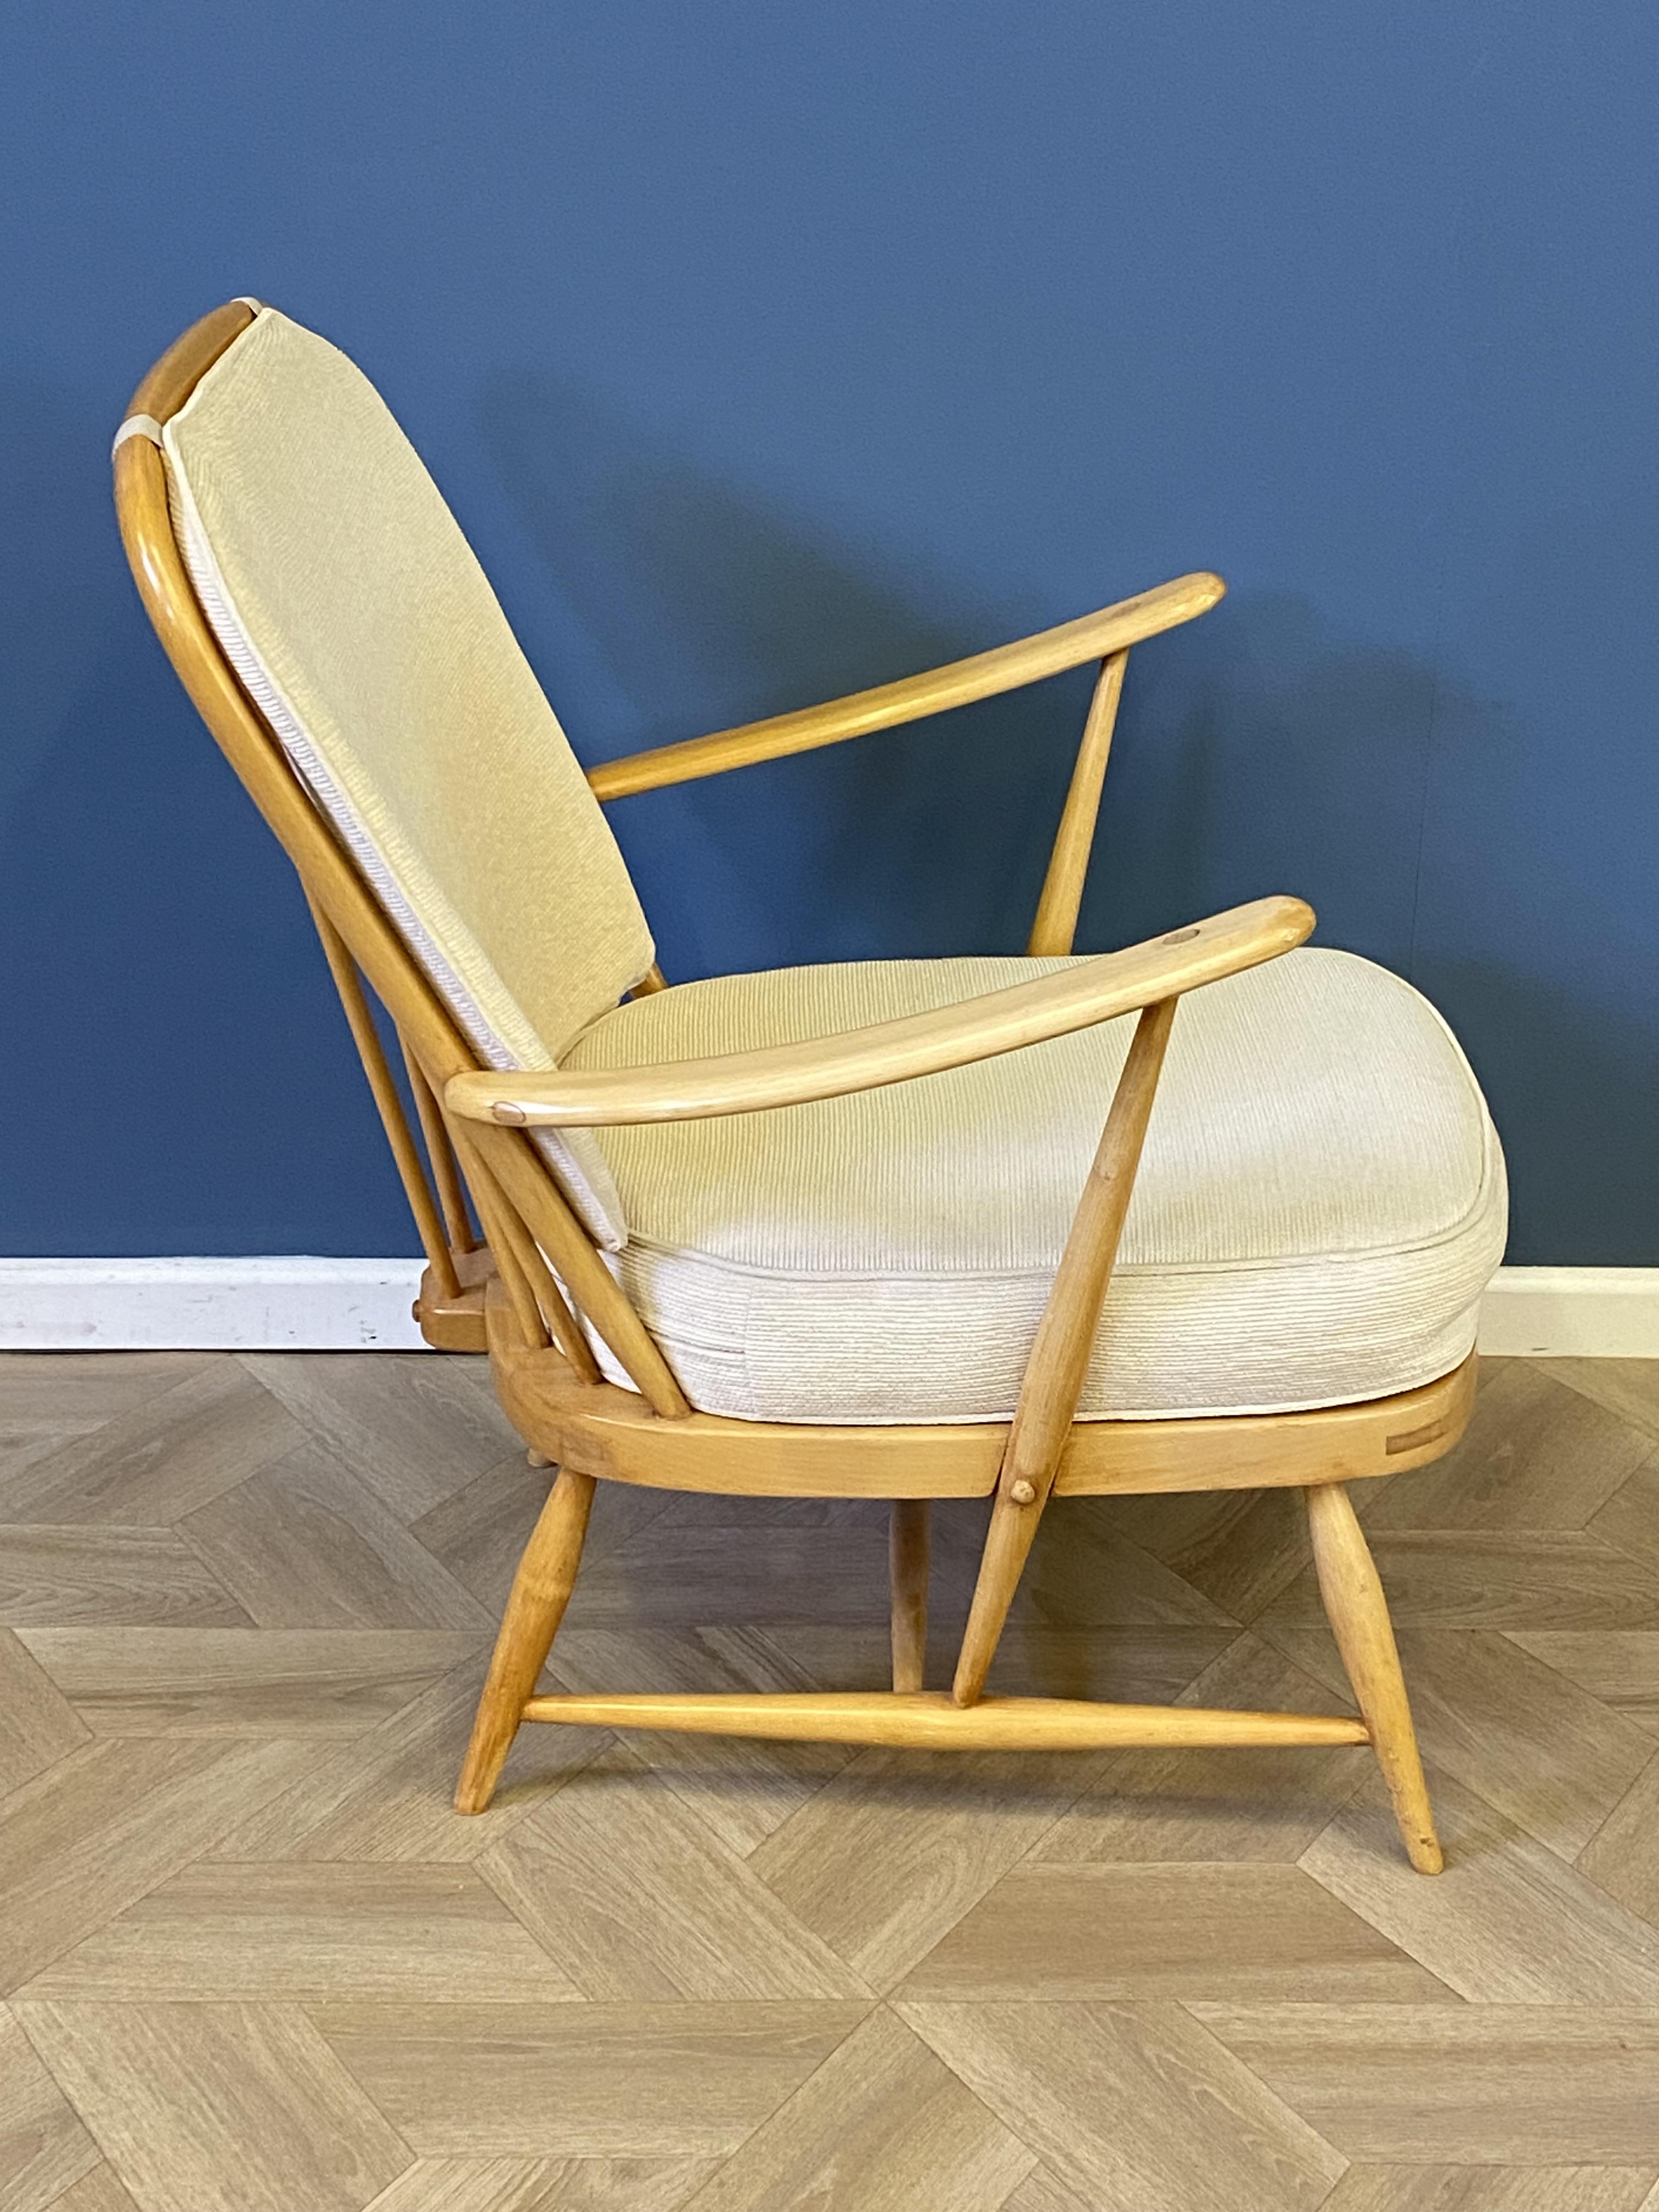 Ercol style open armchair - Image 3 of 7